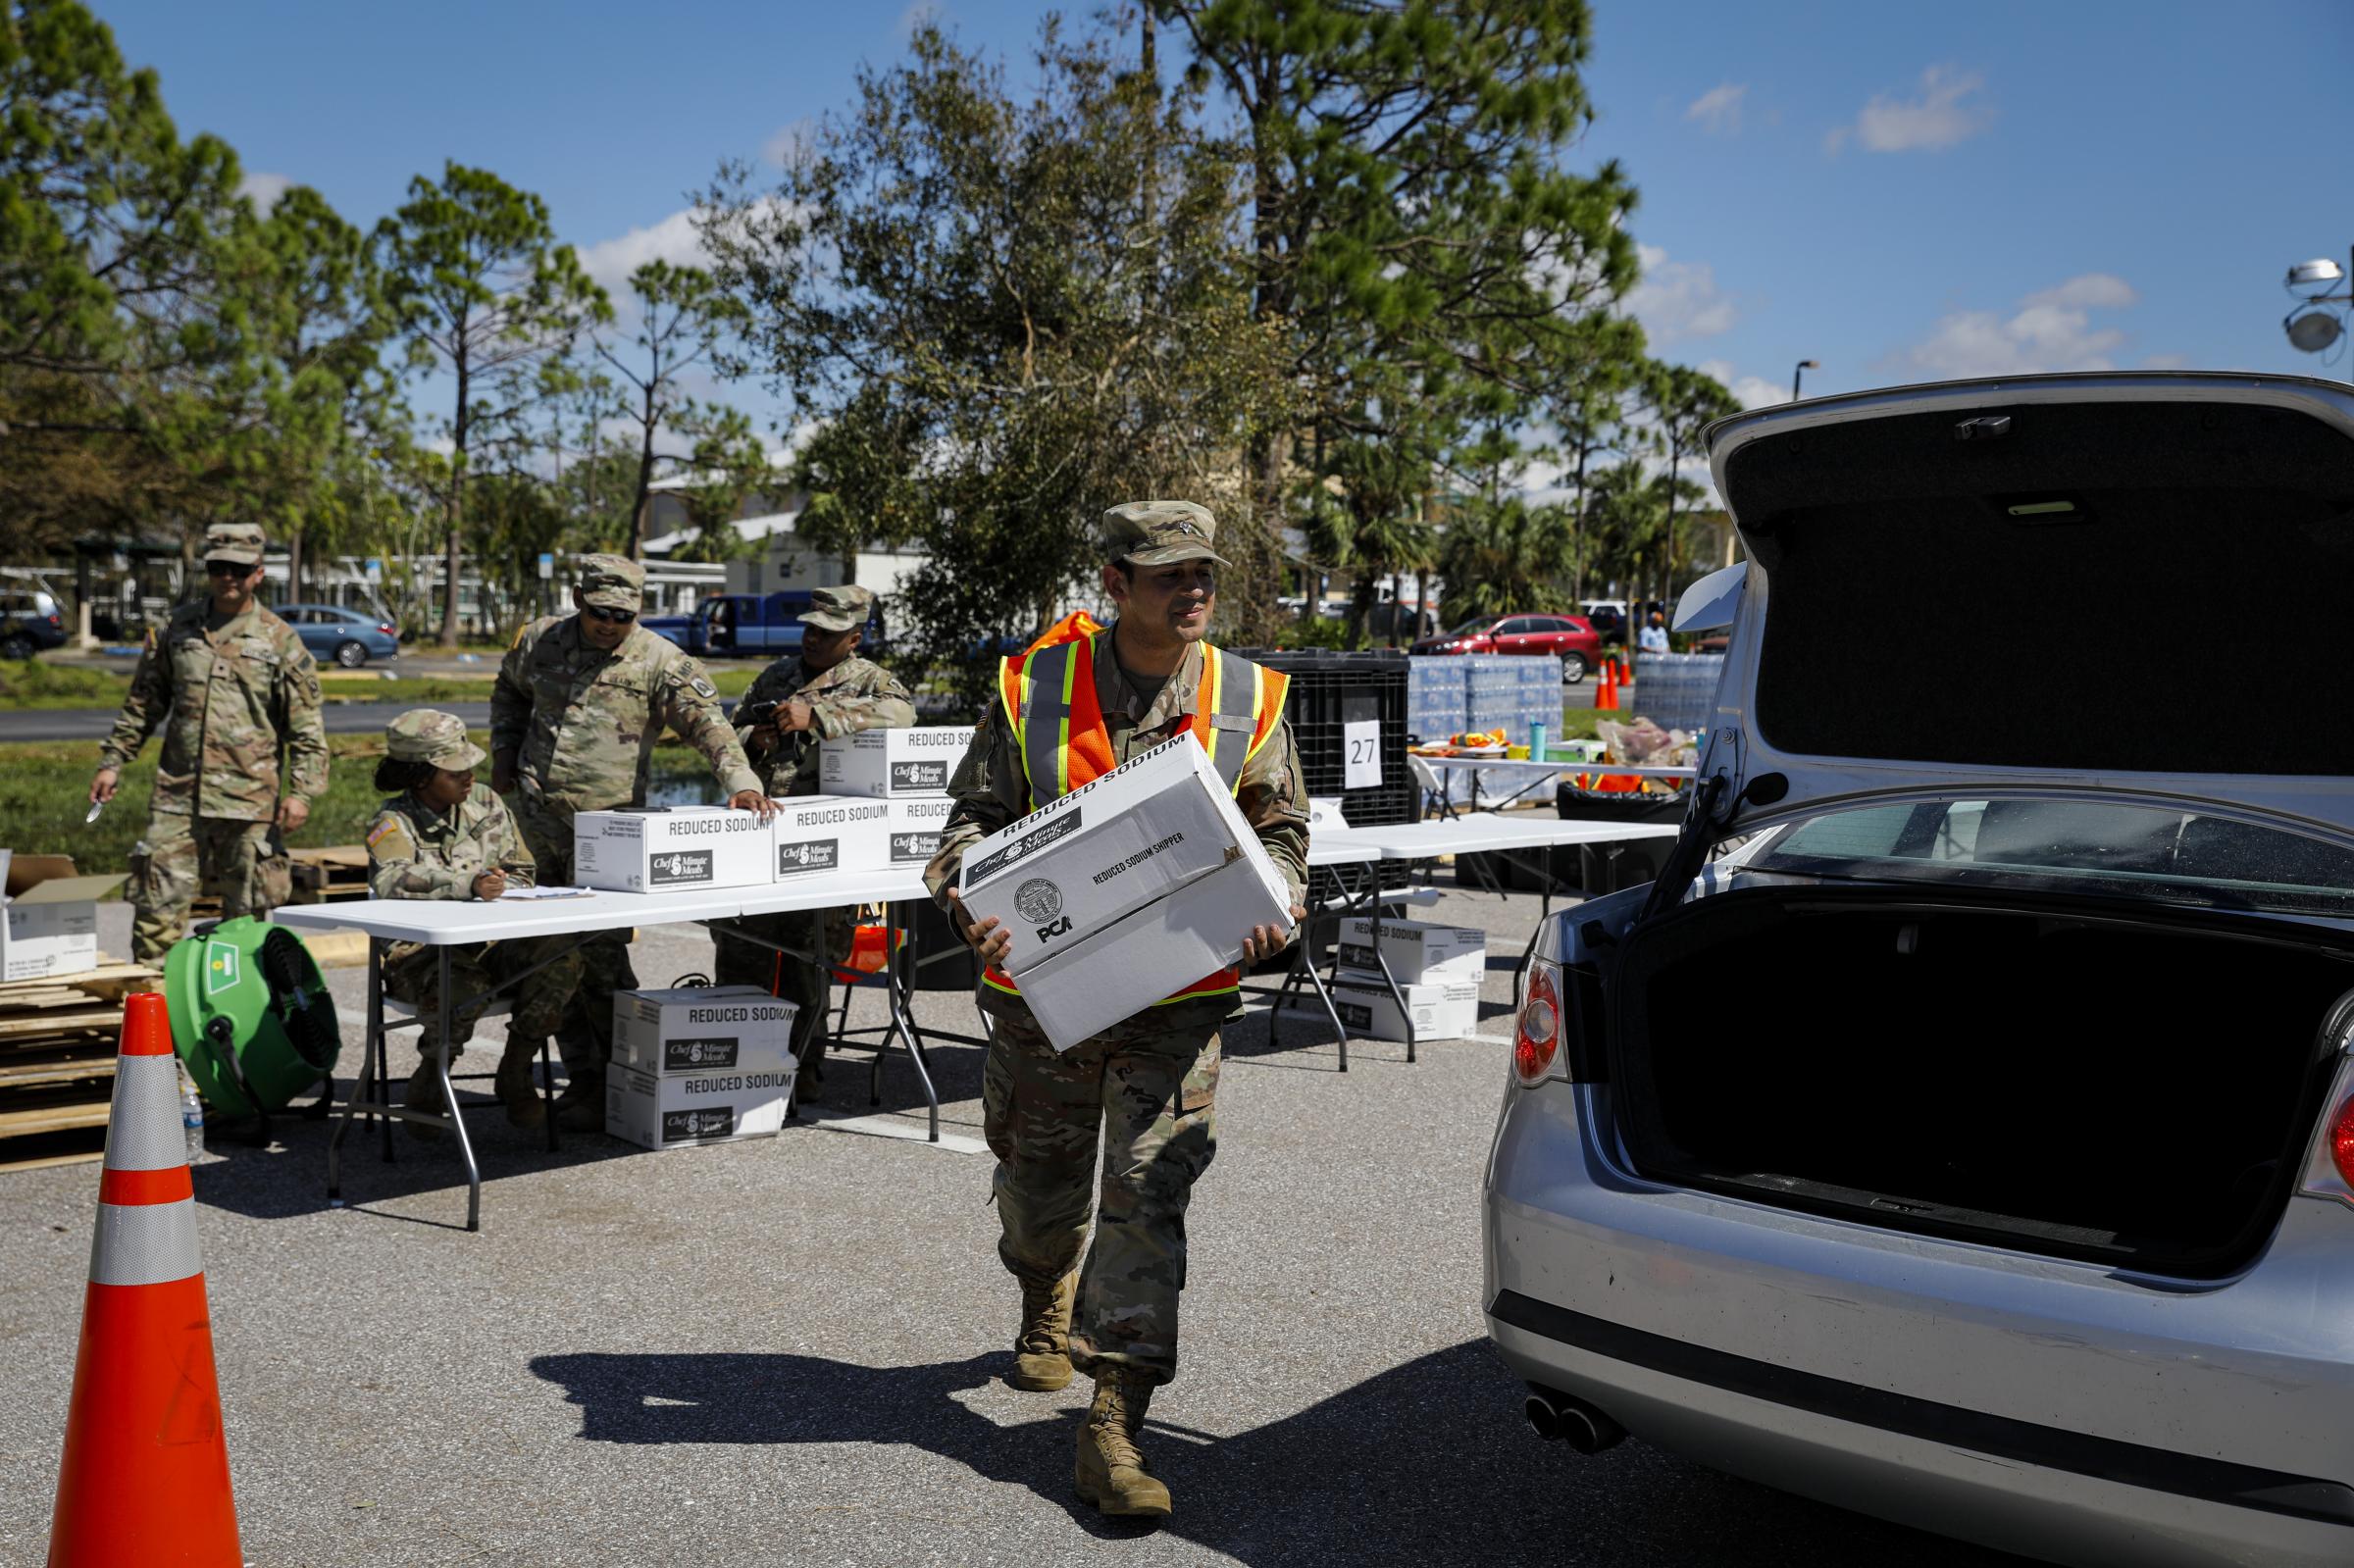 2022 - Hurricane Ian - Soldiers from U.S. Army distribute food following...